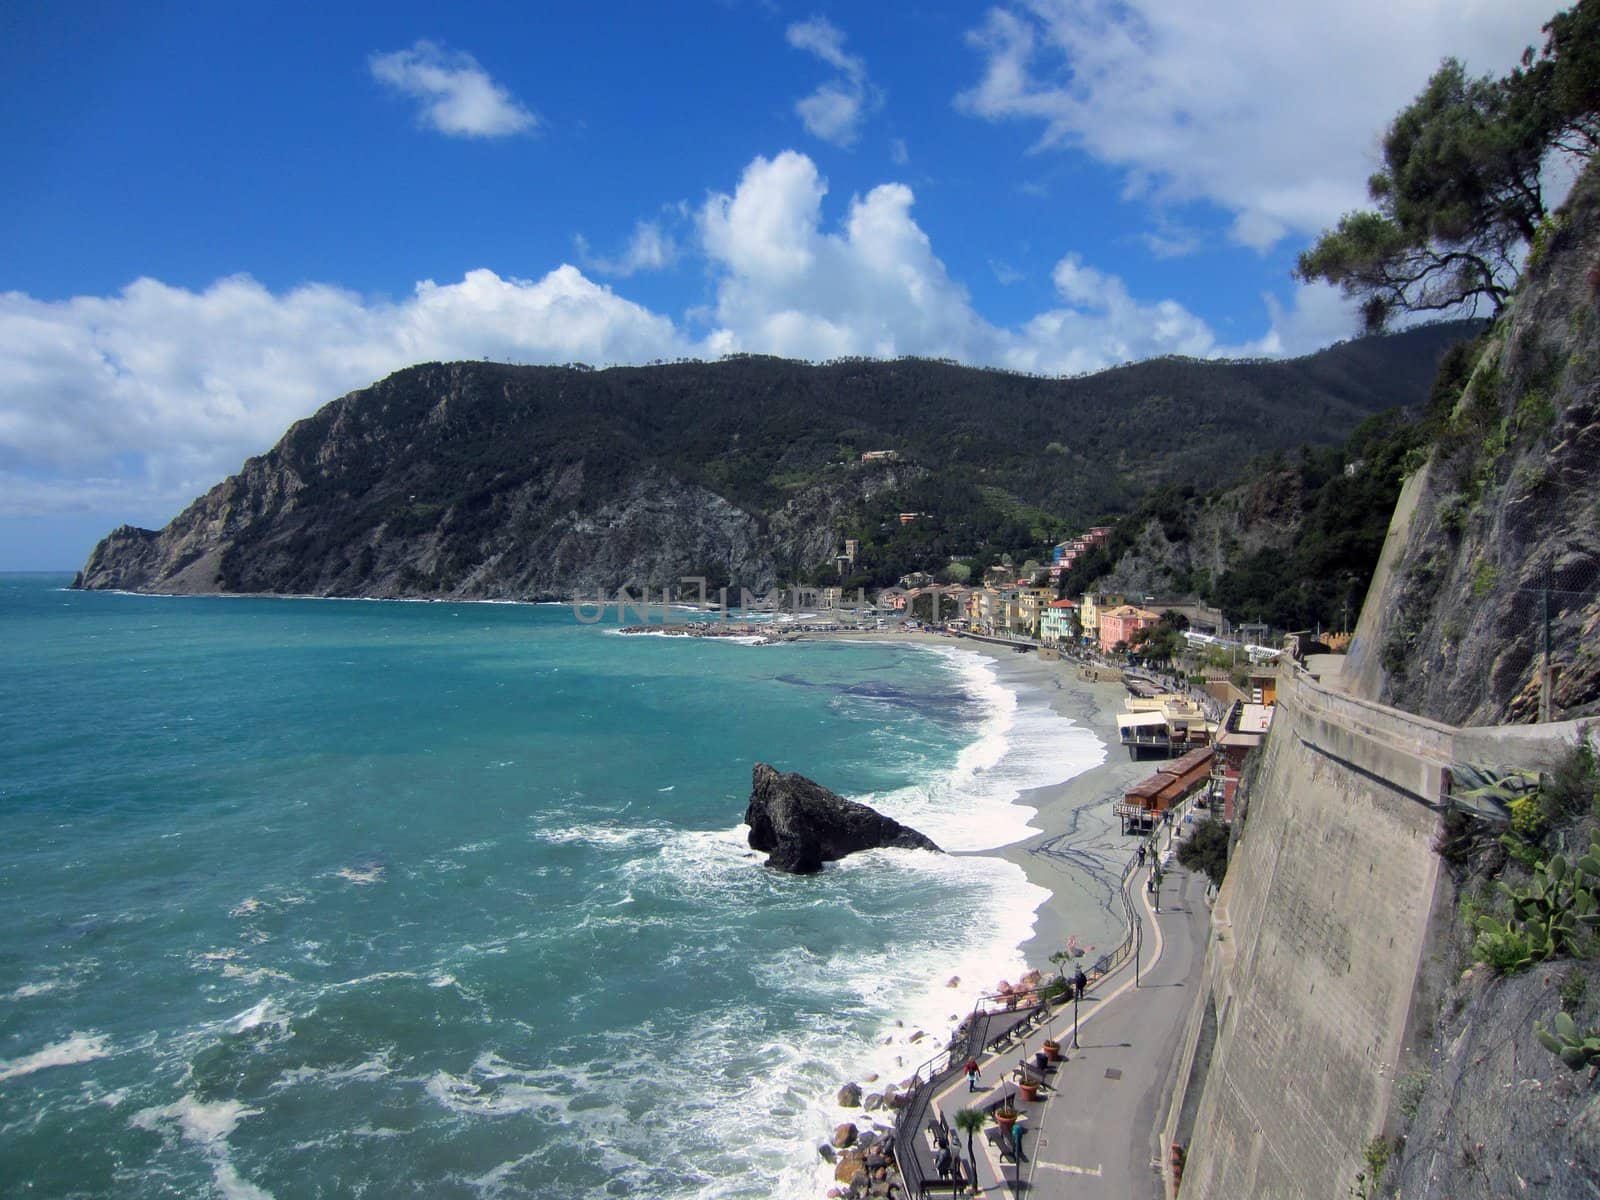 Monterosso, Italy by jol66